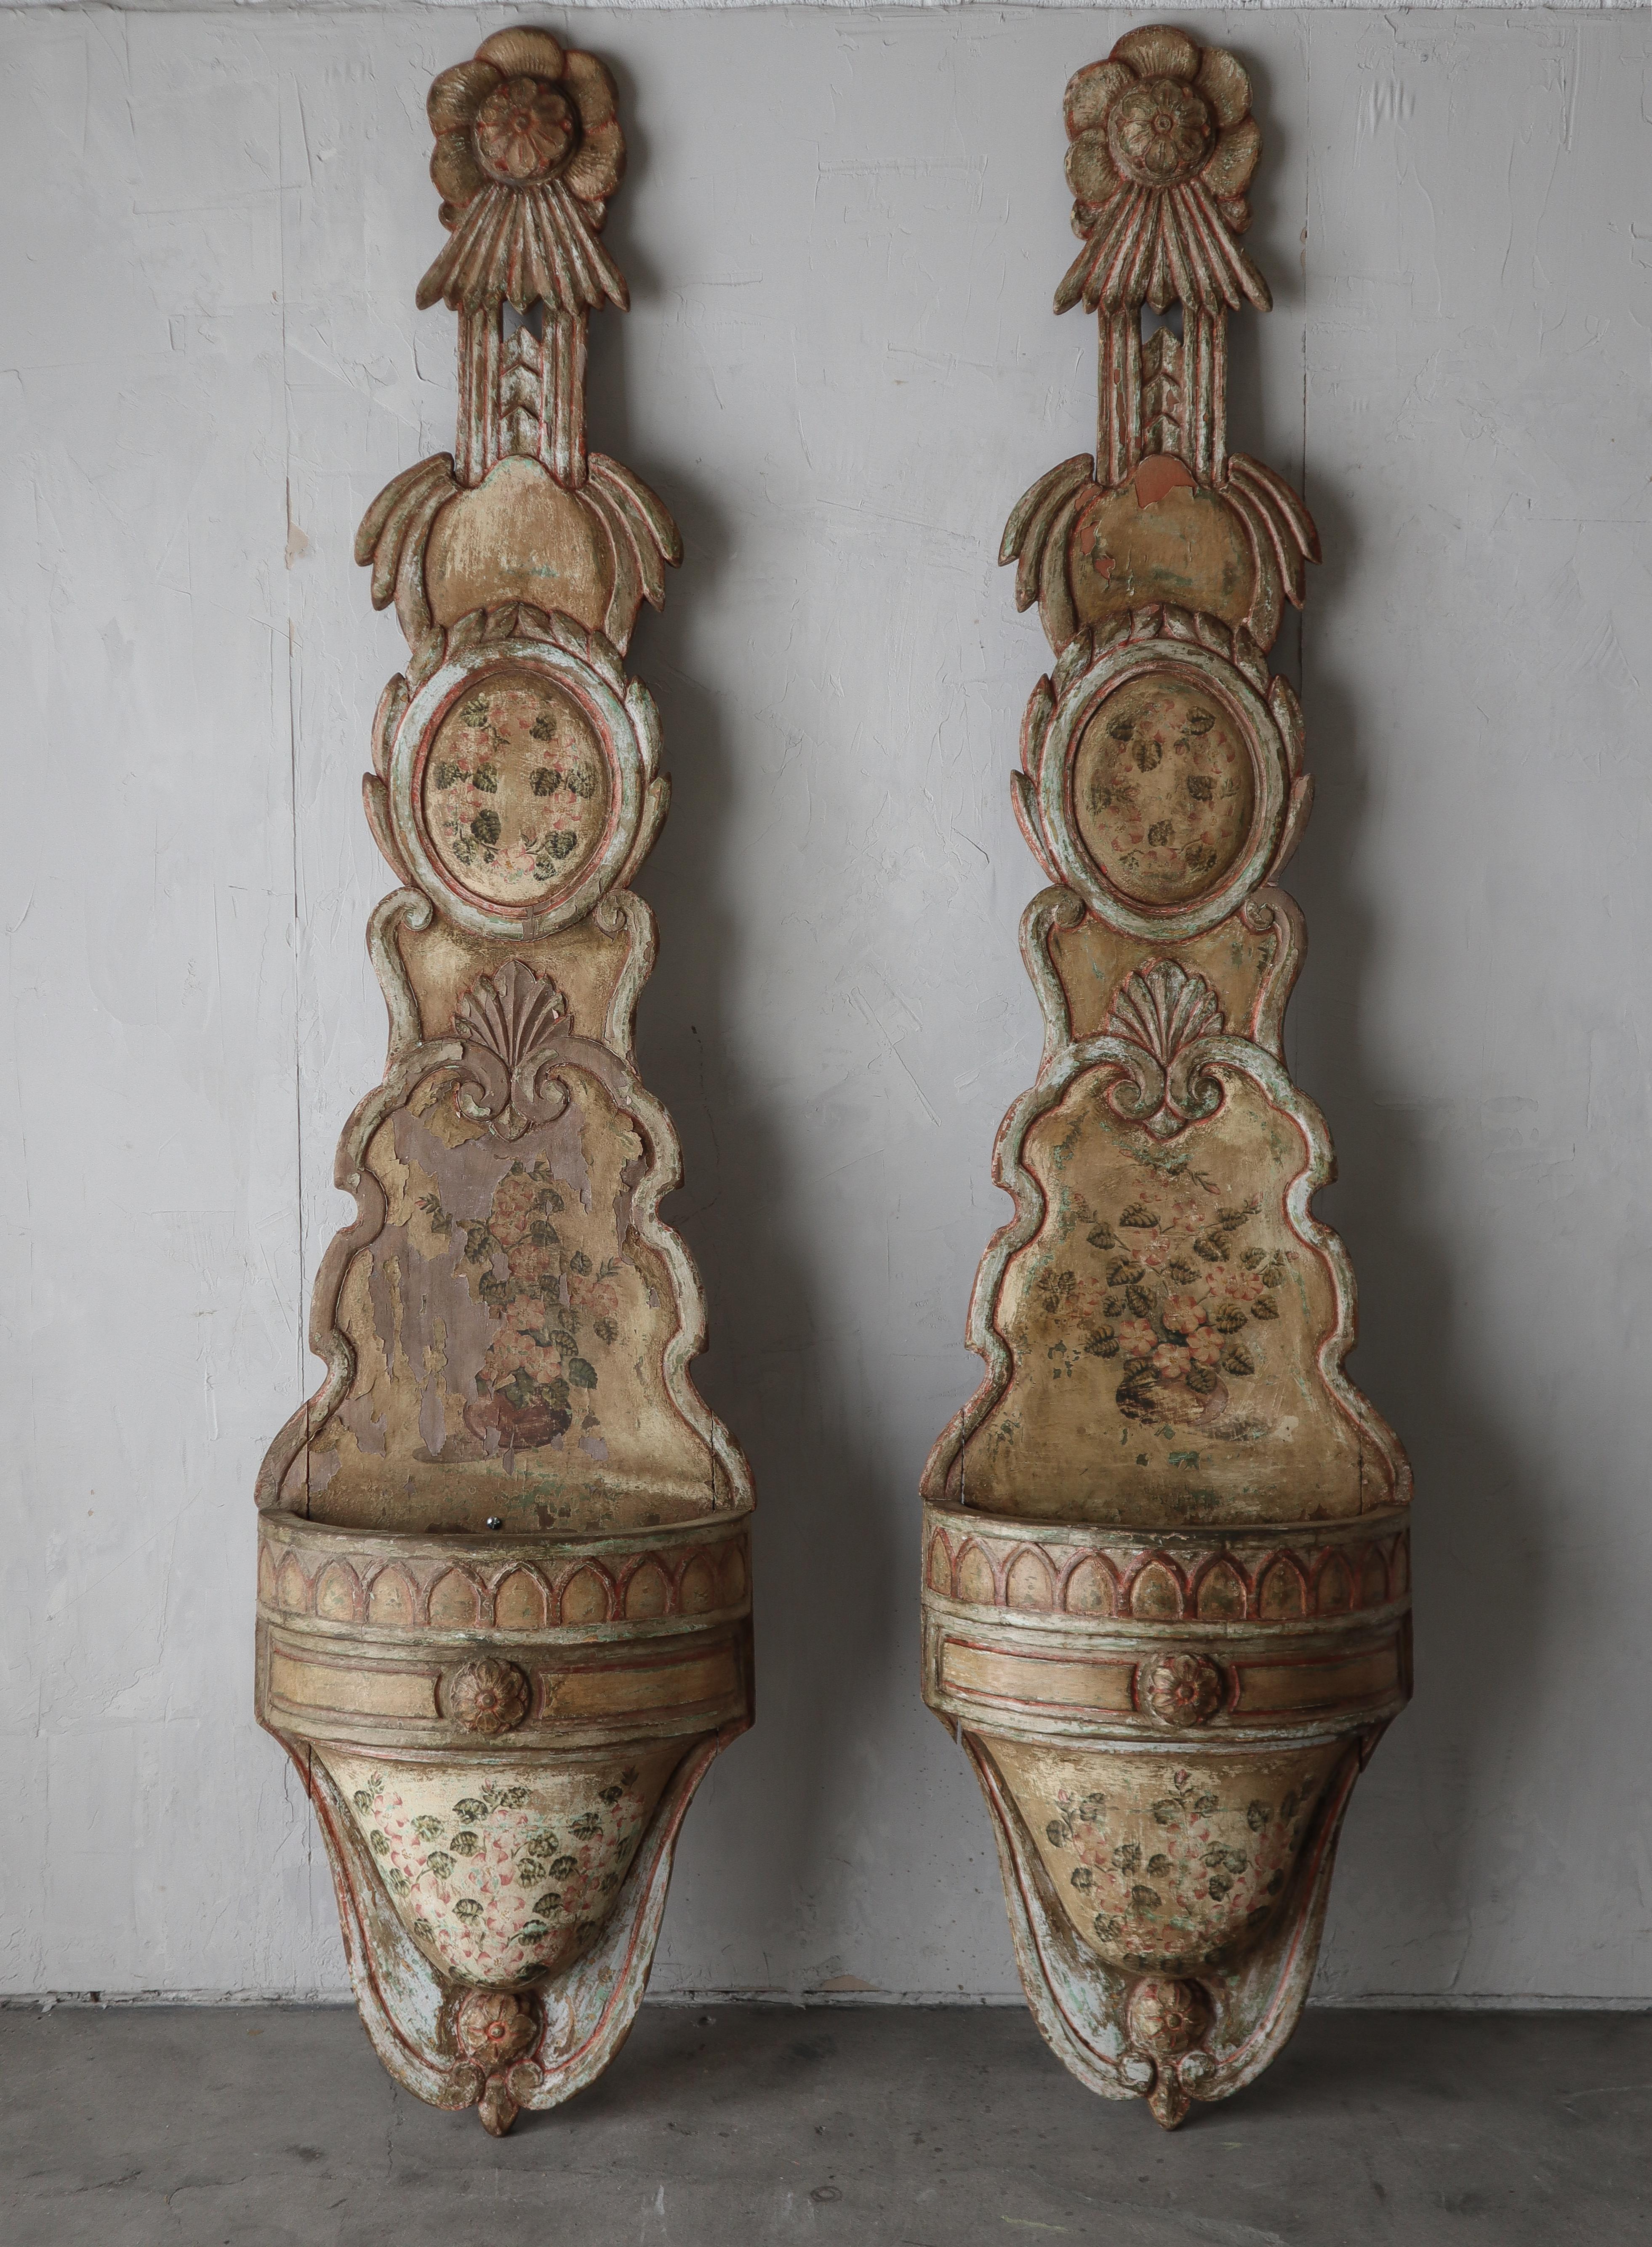 8ft Tall Pair of Antique European Wood Jardiniere Planters In Good Condition For Sale In Las Vegas, NV